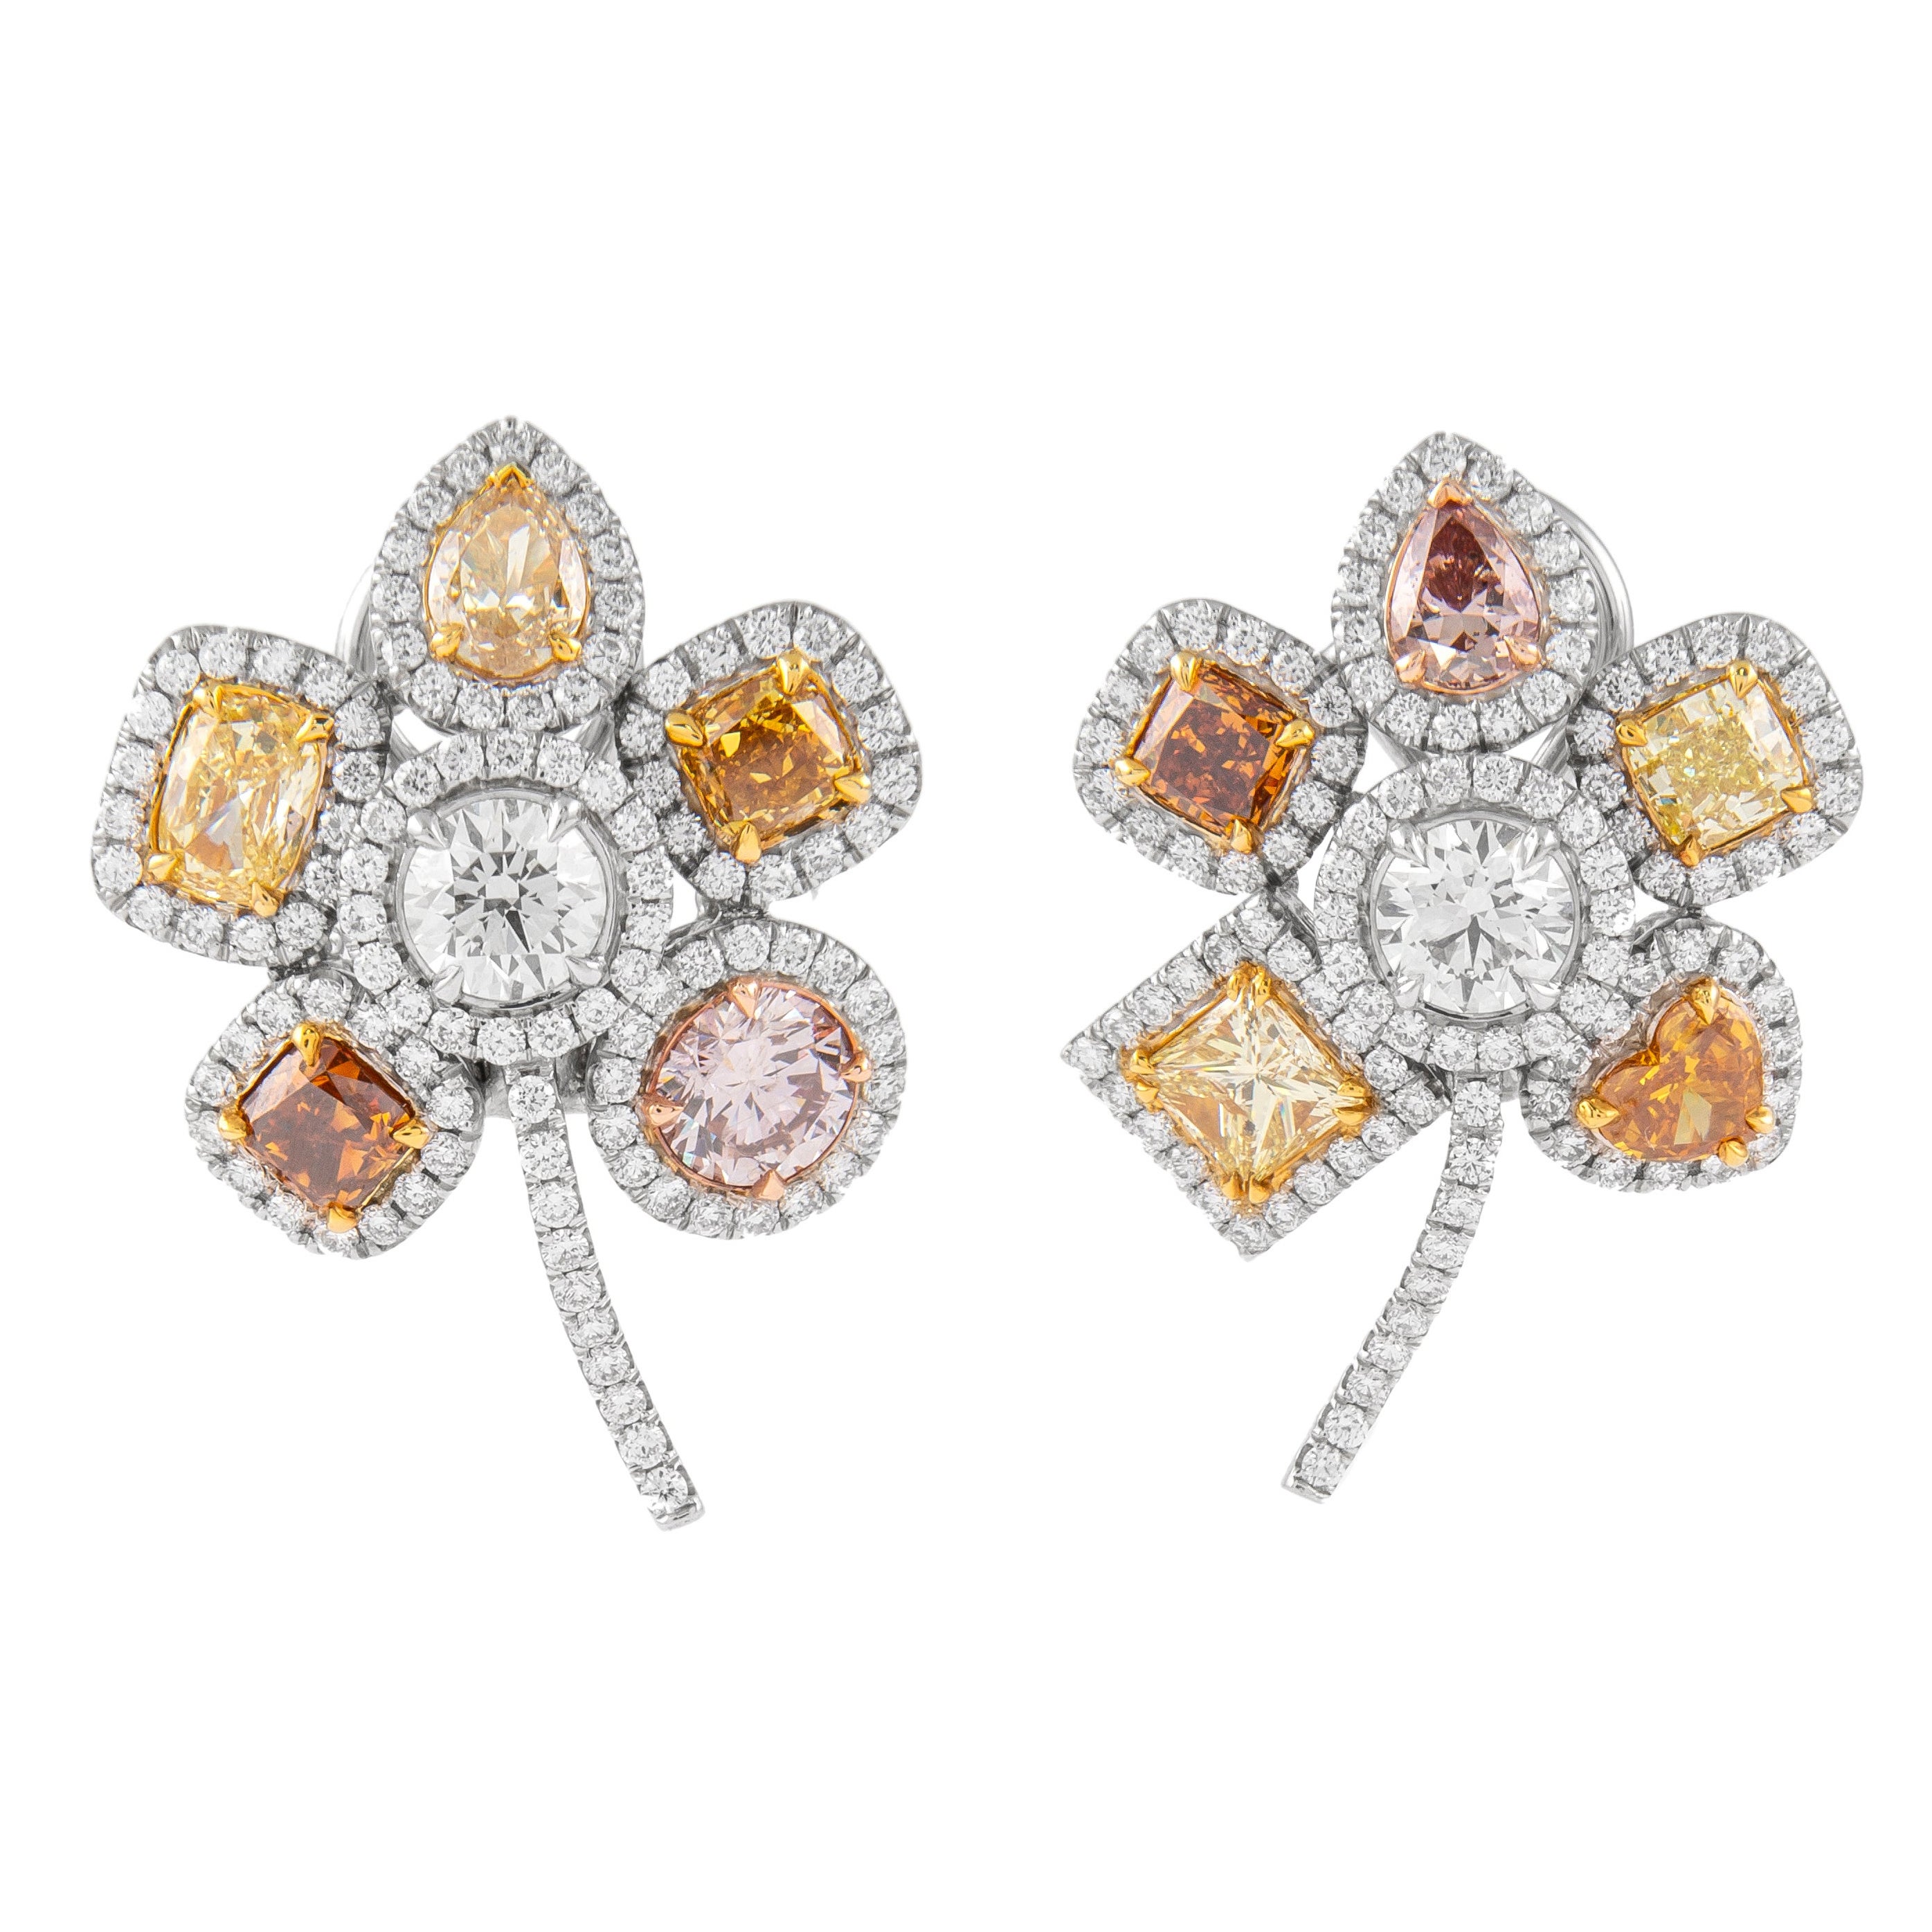 Alexander Beverly Hills GIA 7.52ct Fancy Color Diamond Floral Earrings 18k Gold